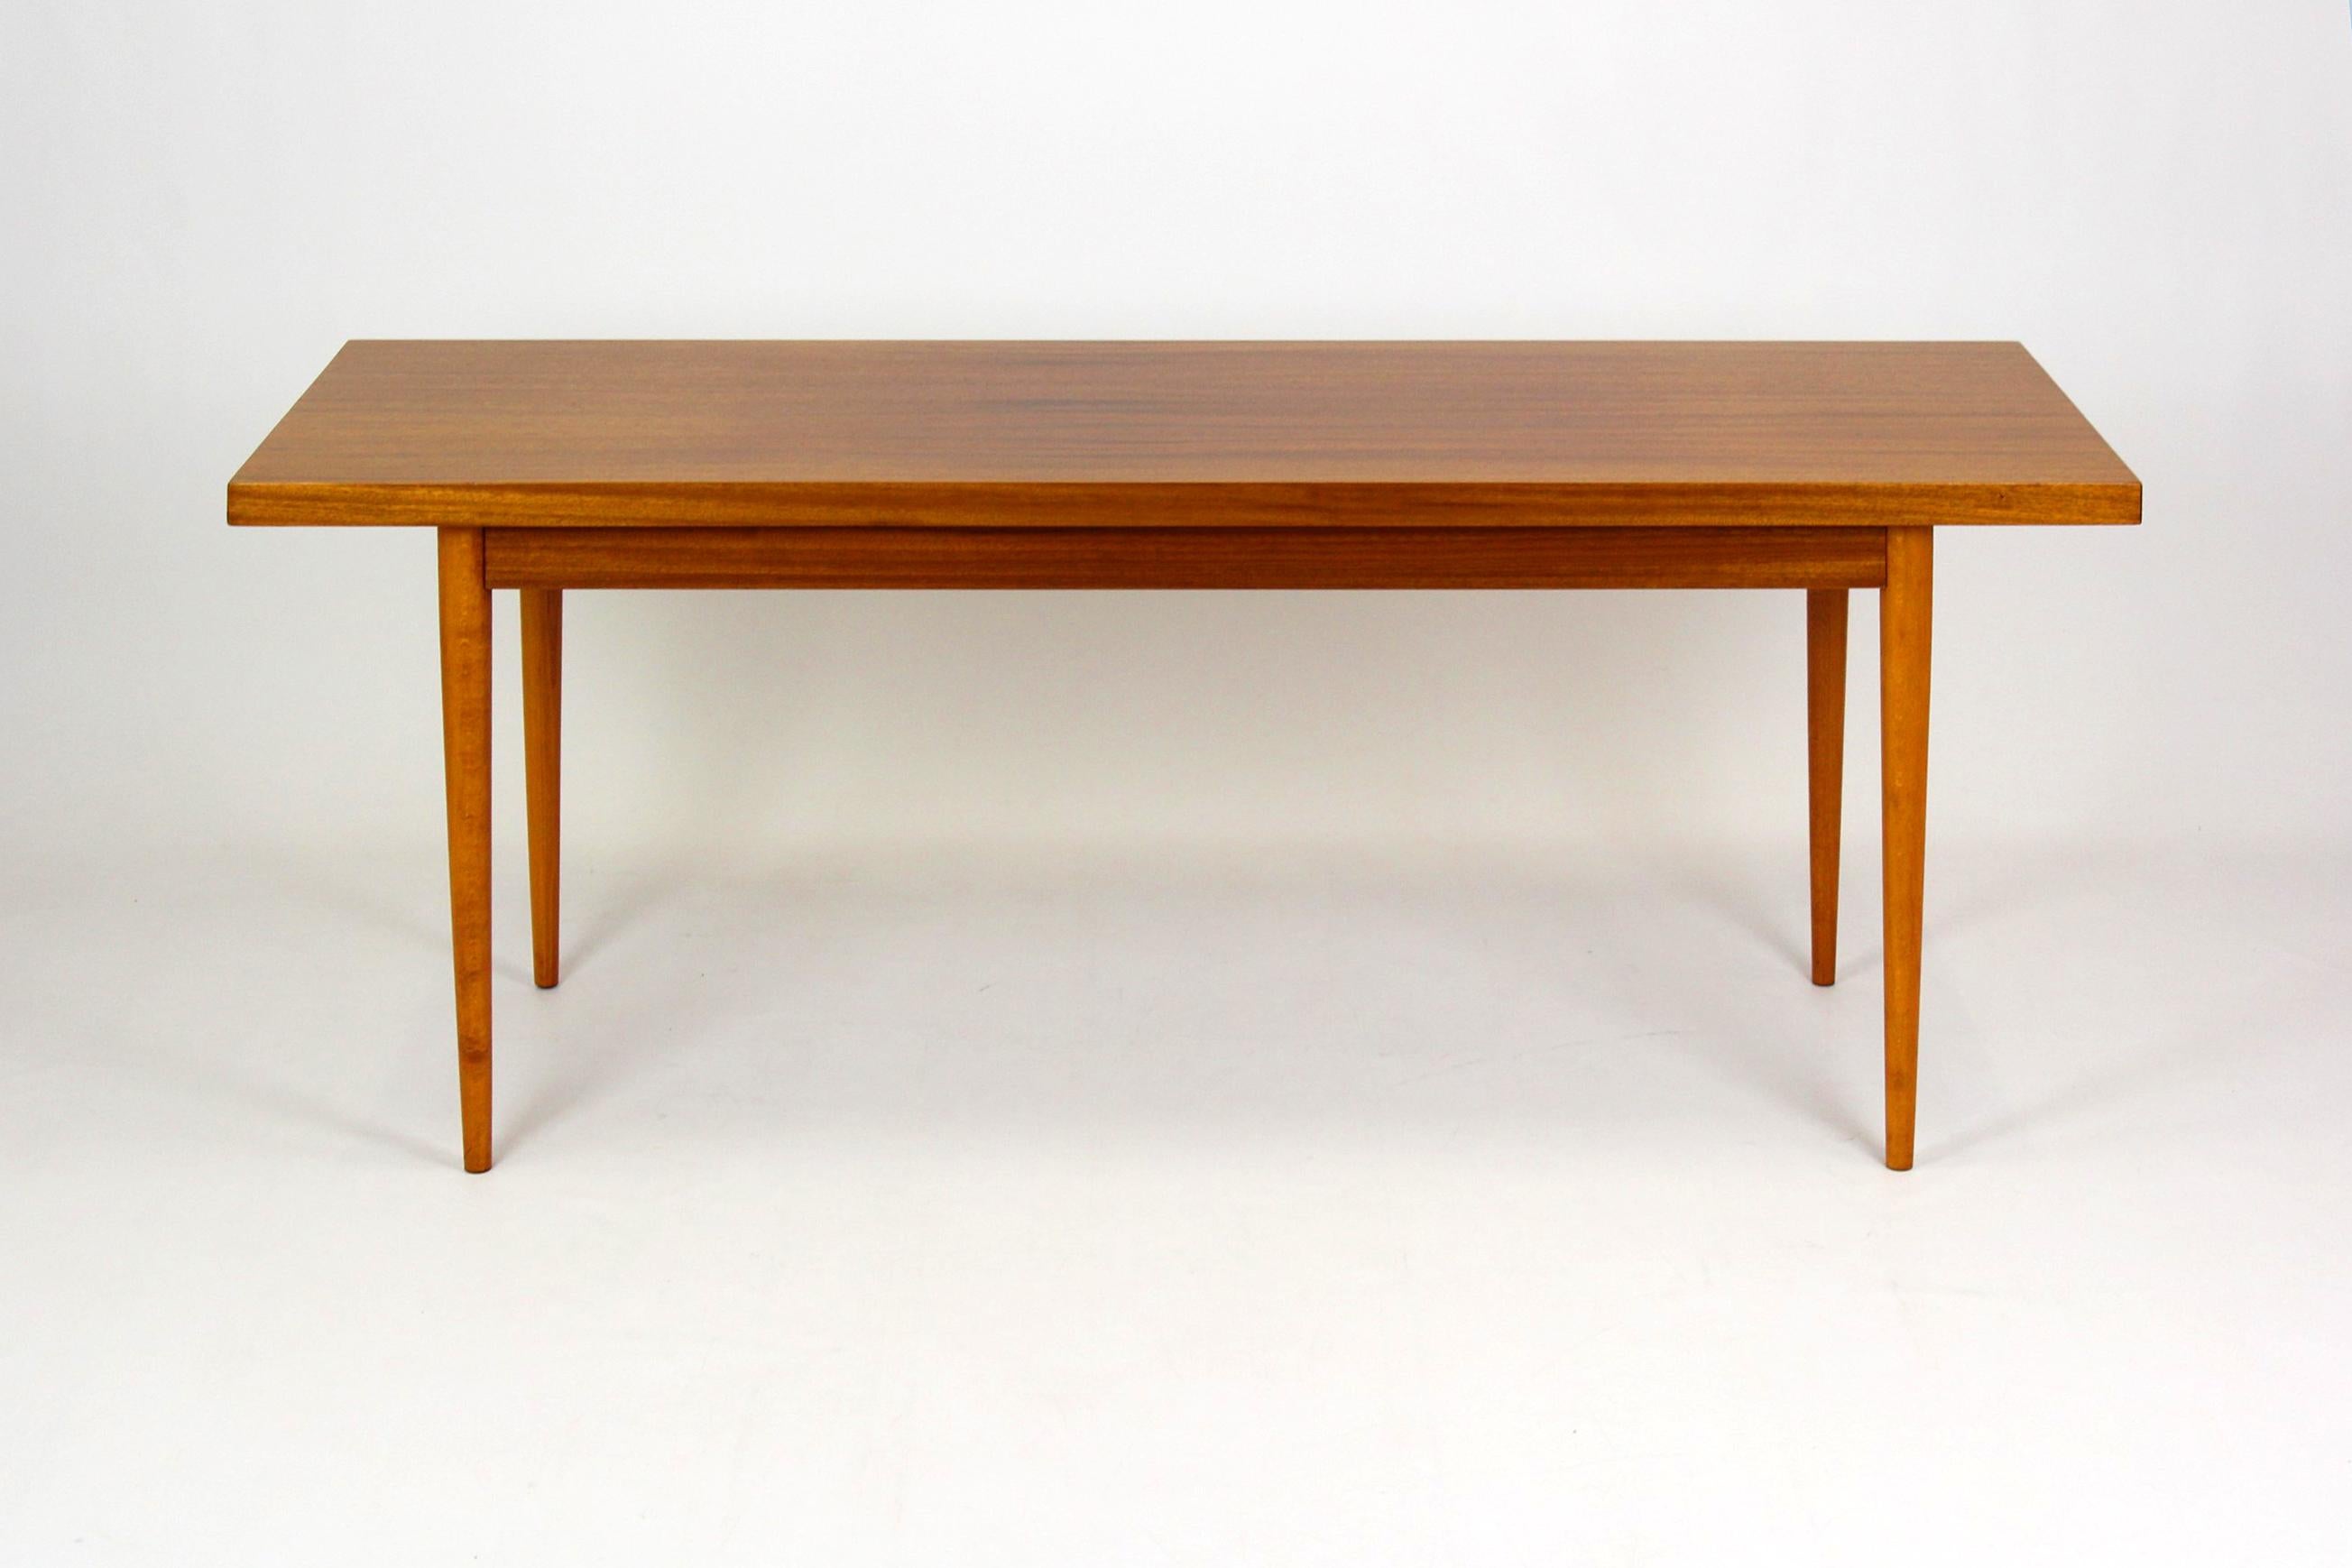 This Mid-Century Modern mahogany coffee table was manufactured in 1969 in the Czech Republic by UP Zavody. It is preserved in a very good, original condition. Legs can be unscrewed for easy shipping.